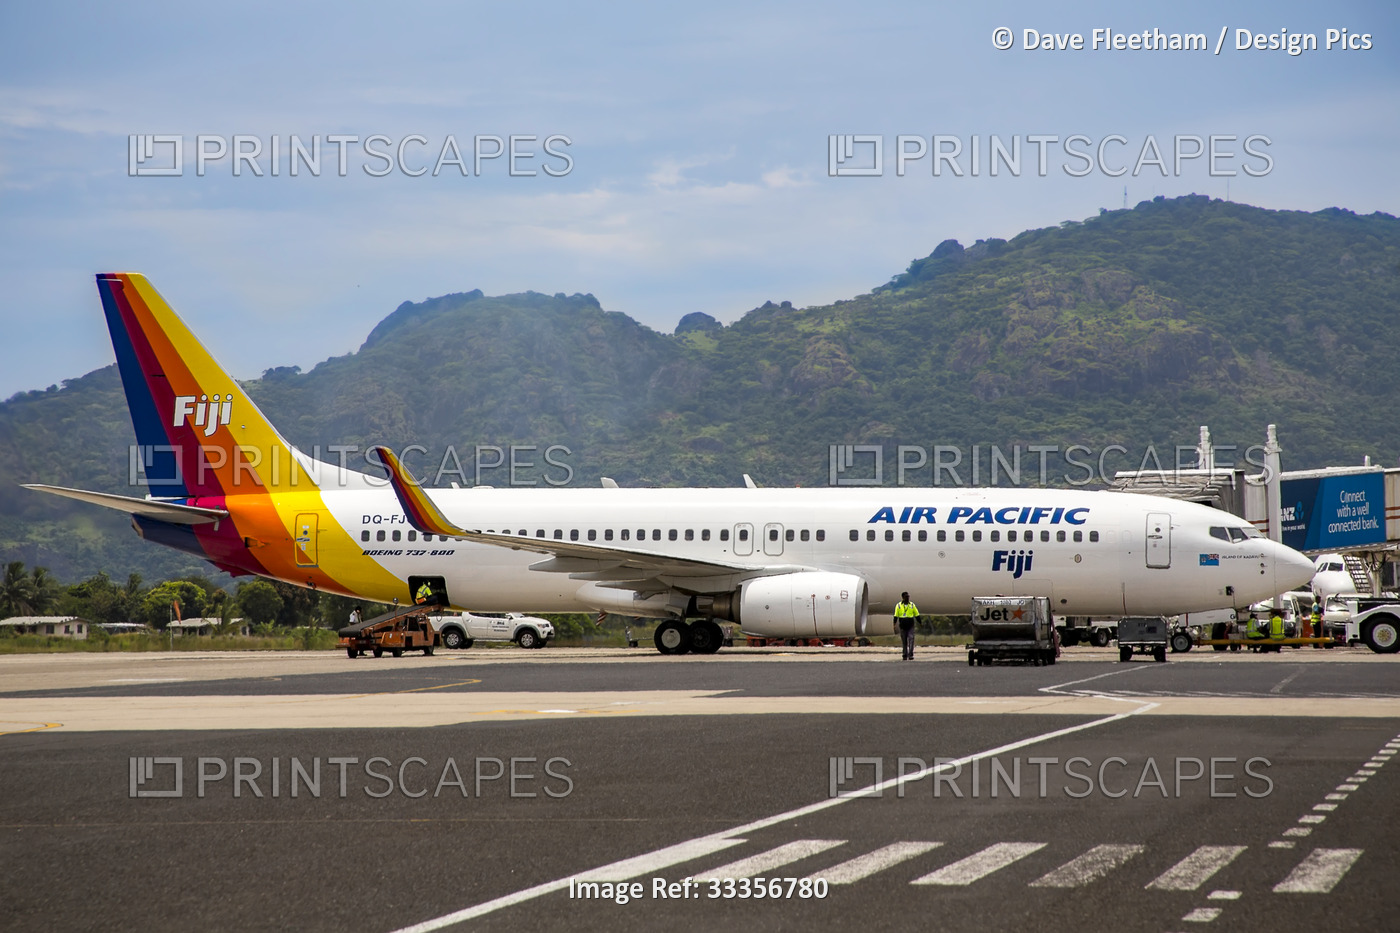 A Fiji Air Pacific Boeing 737-800 airplane on the tarmac at the Nadi ...